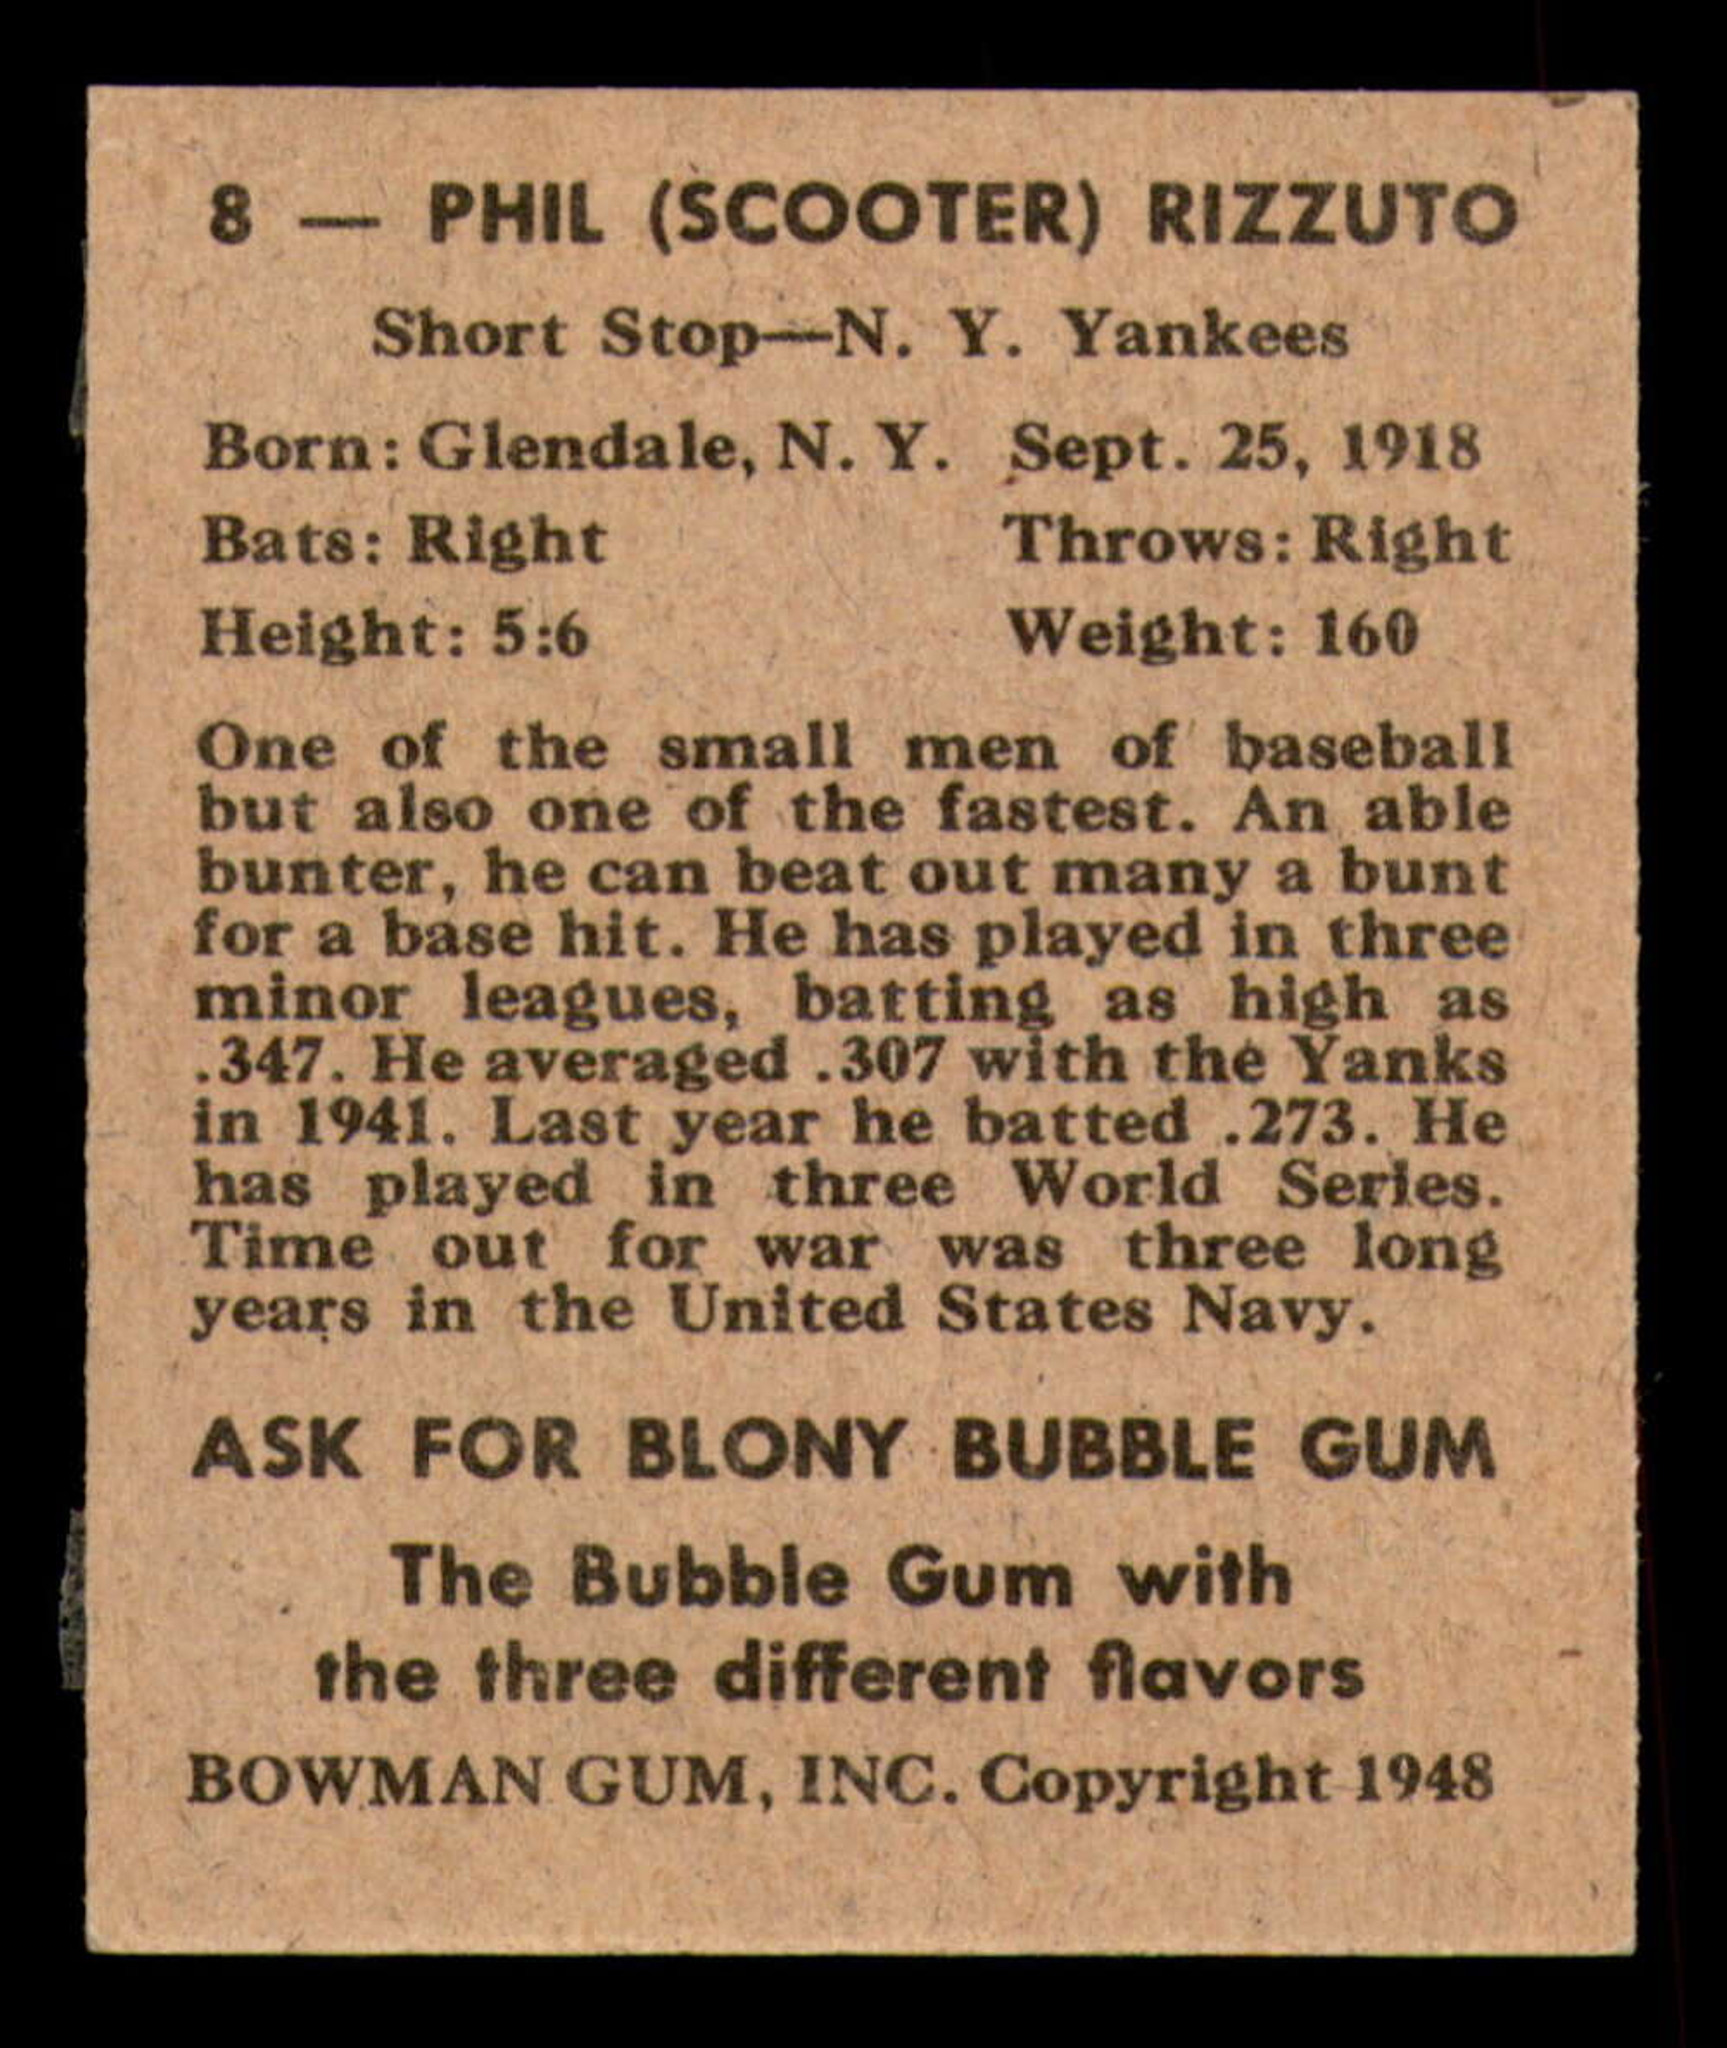 Rizzuto, the Yankee Scooter, from Glendale